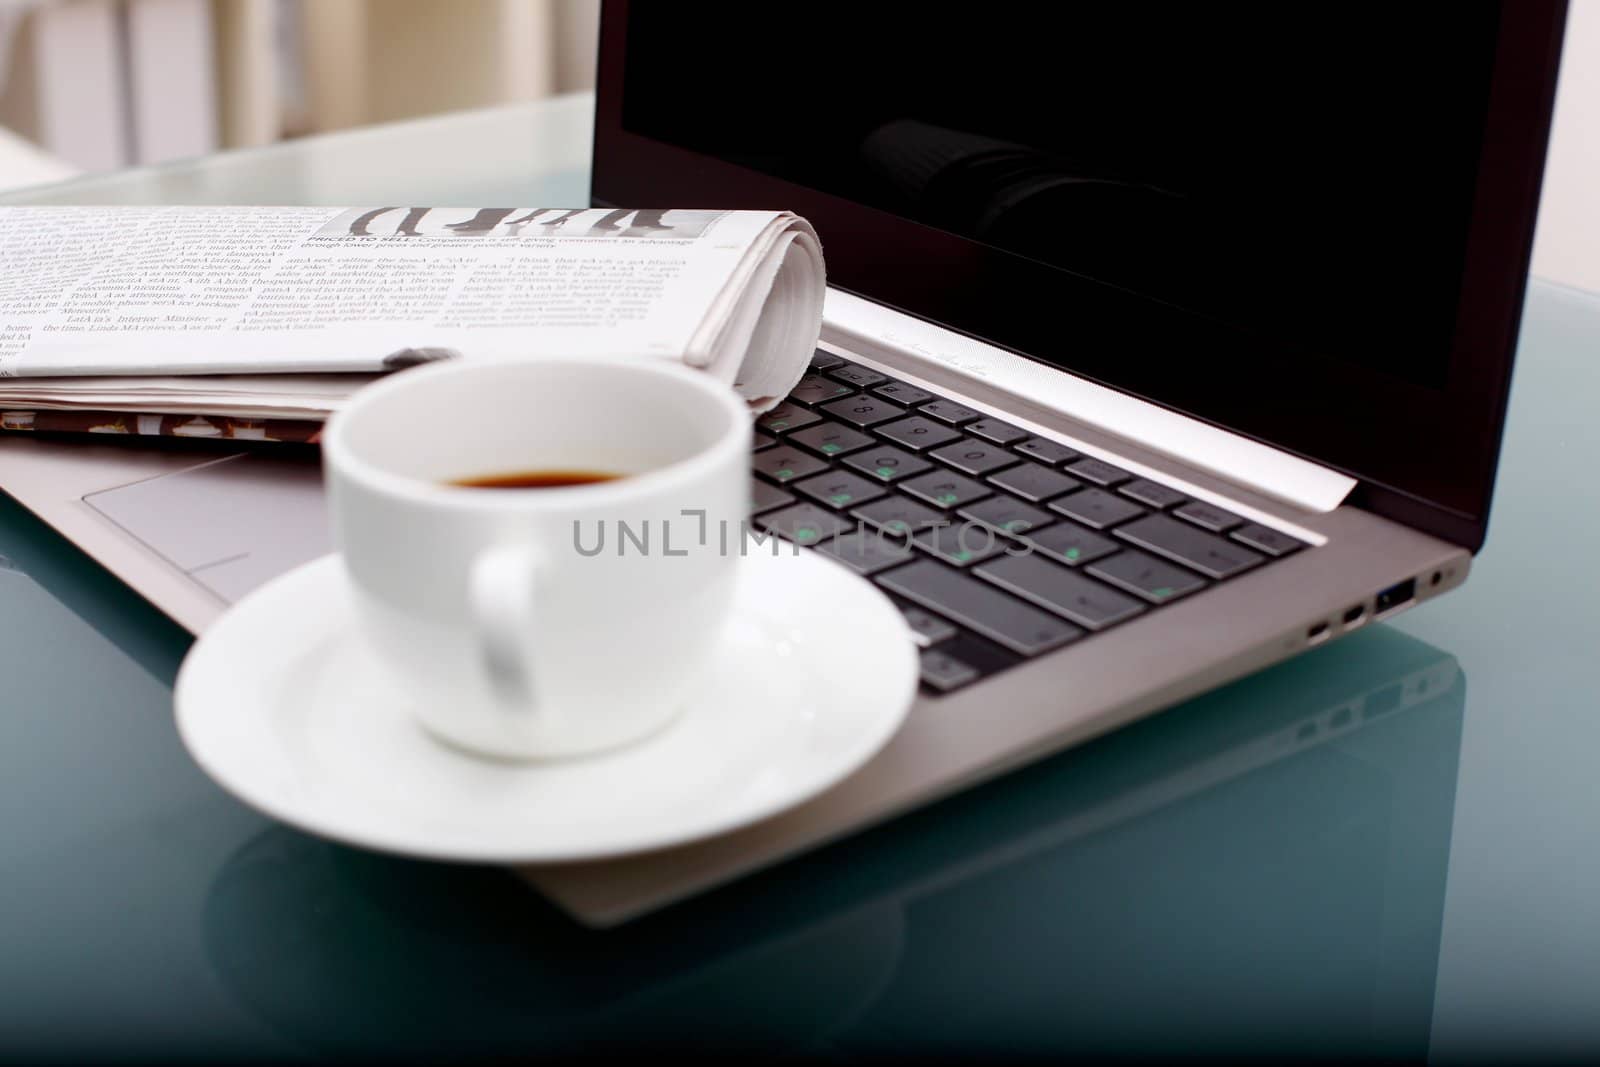 Image of business table with a cup of coffee and norebook